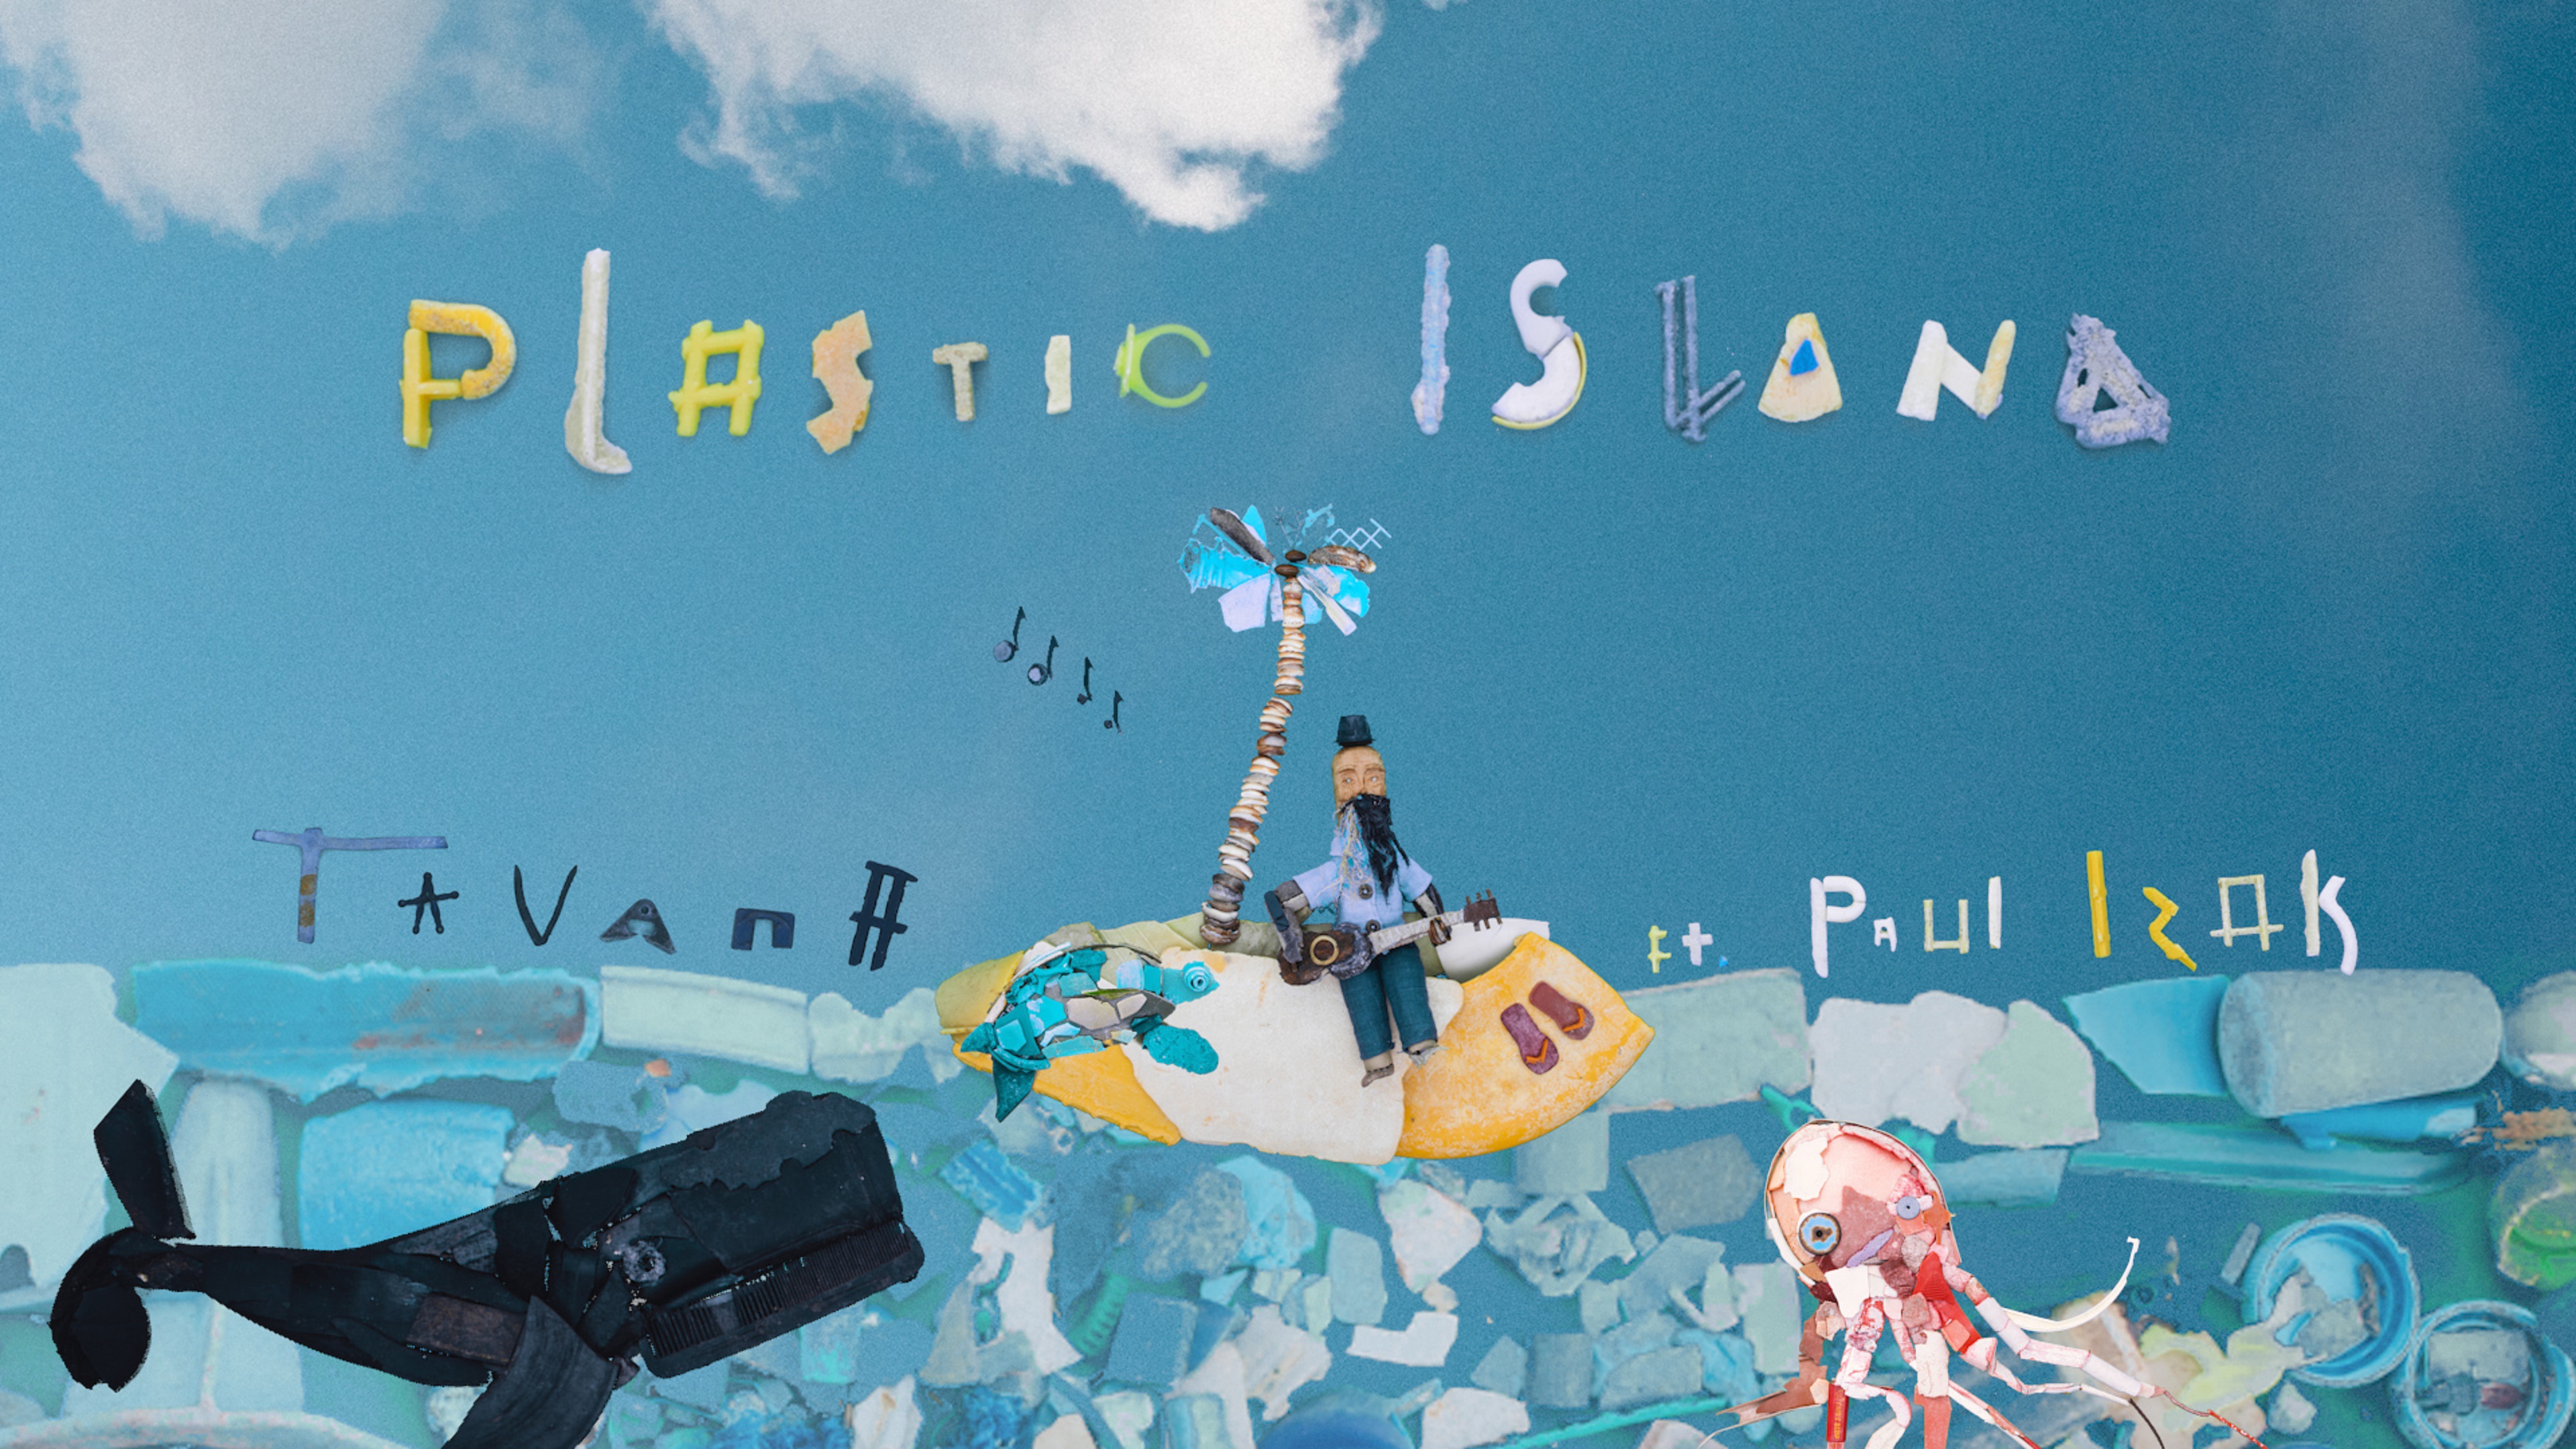 Hawaii Artist Promotes Plastic Free Future with New Music Video, Out January 15